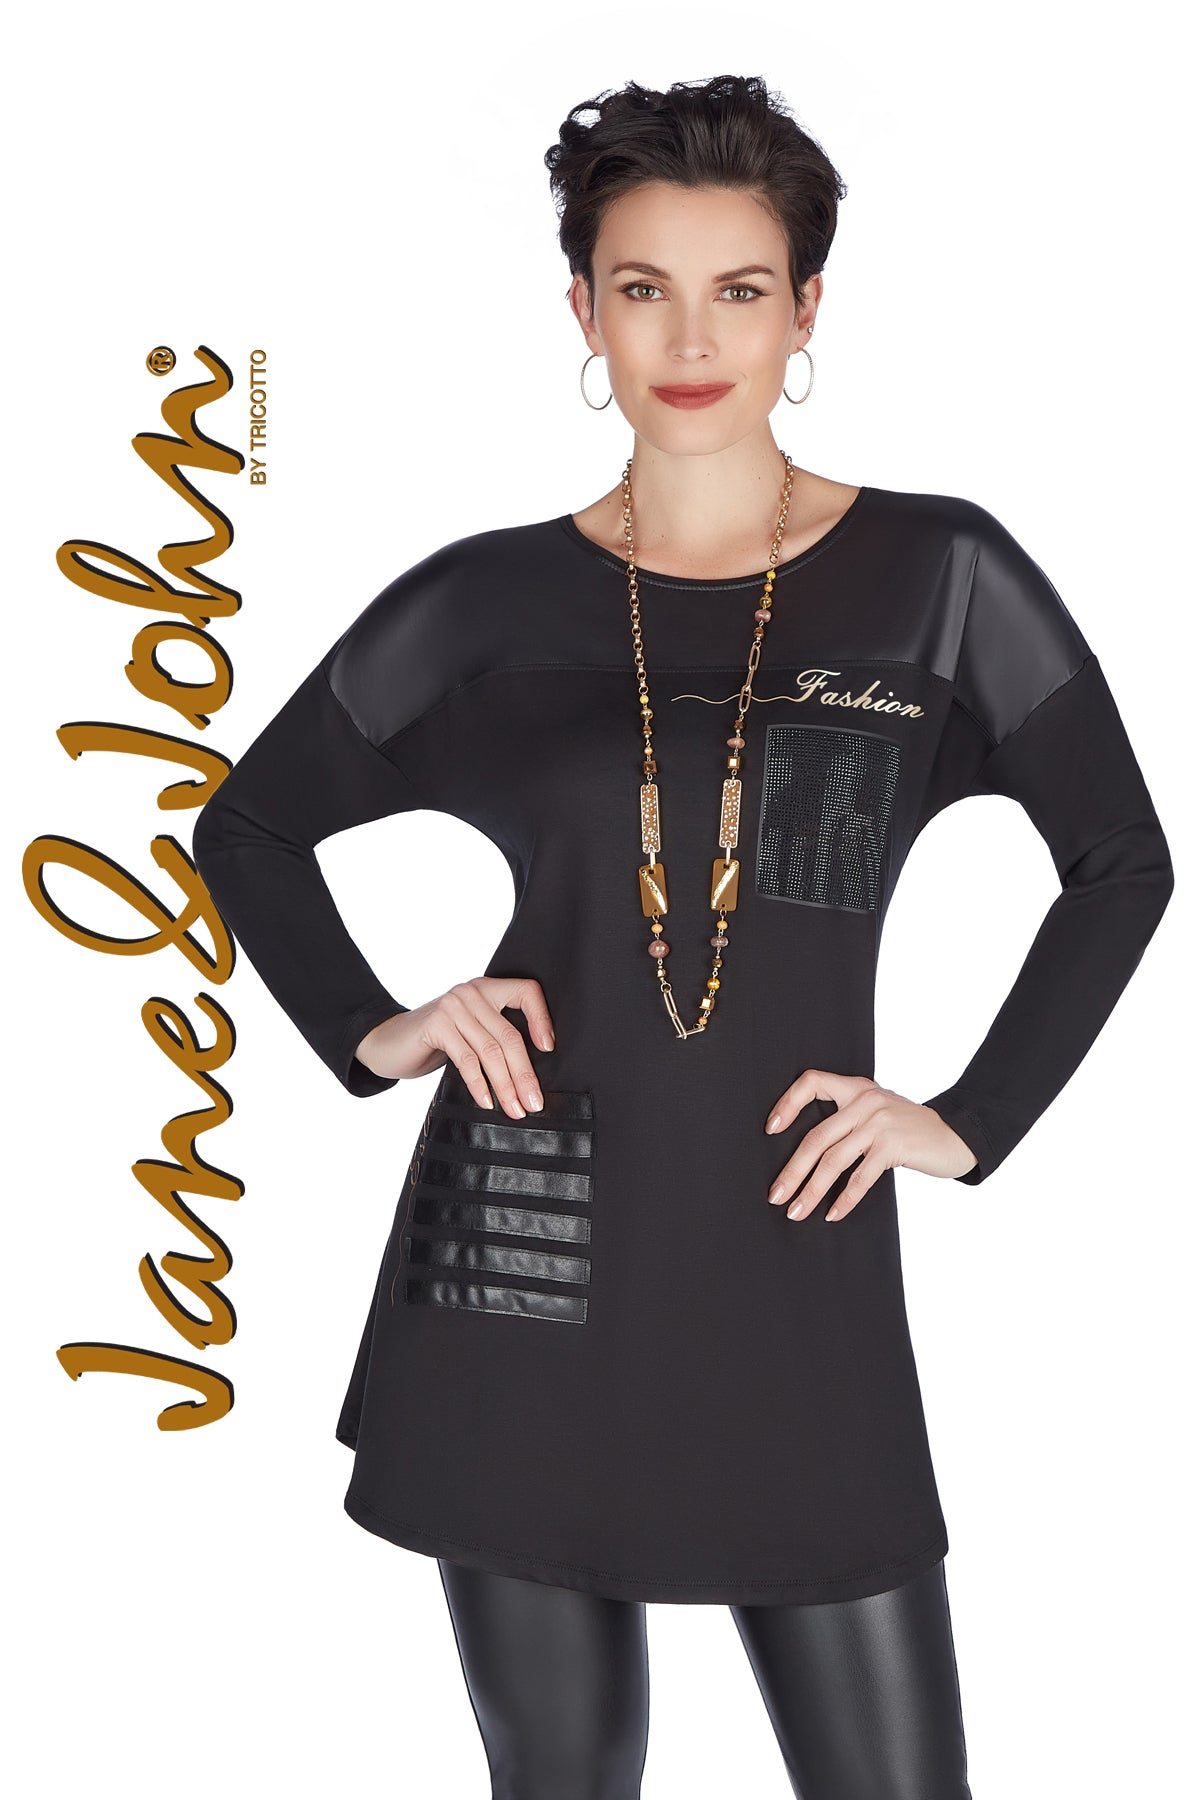 Tricotto Tunics-Buy Tricotto Clothing Online-Jane & John Clothing Montreal-Jane & John Sweaters-Tricotto Online Shop